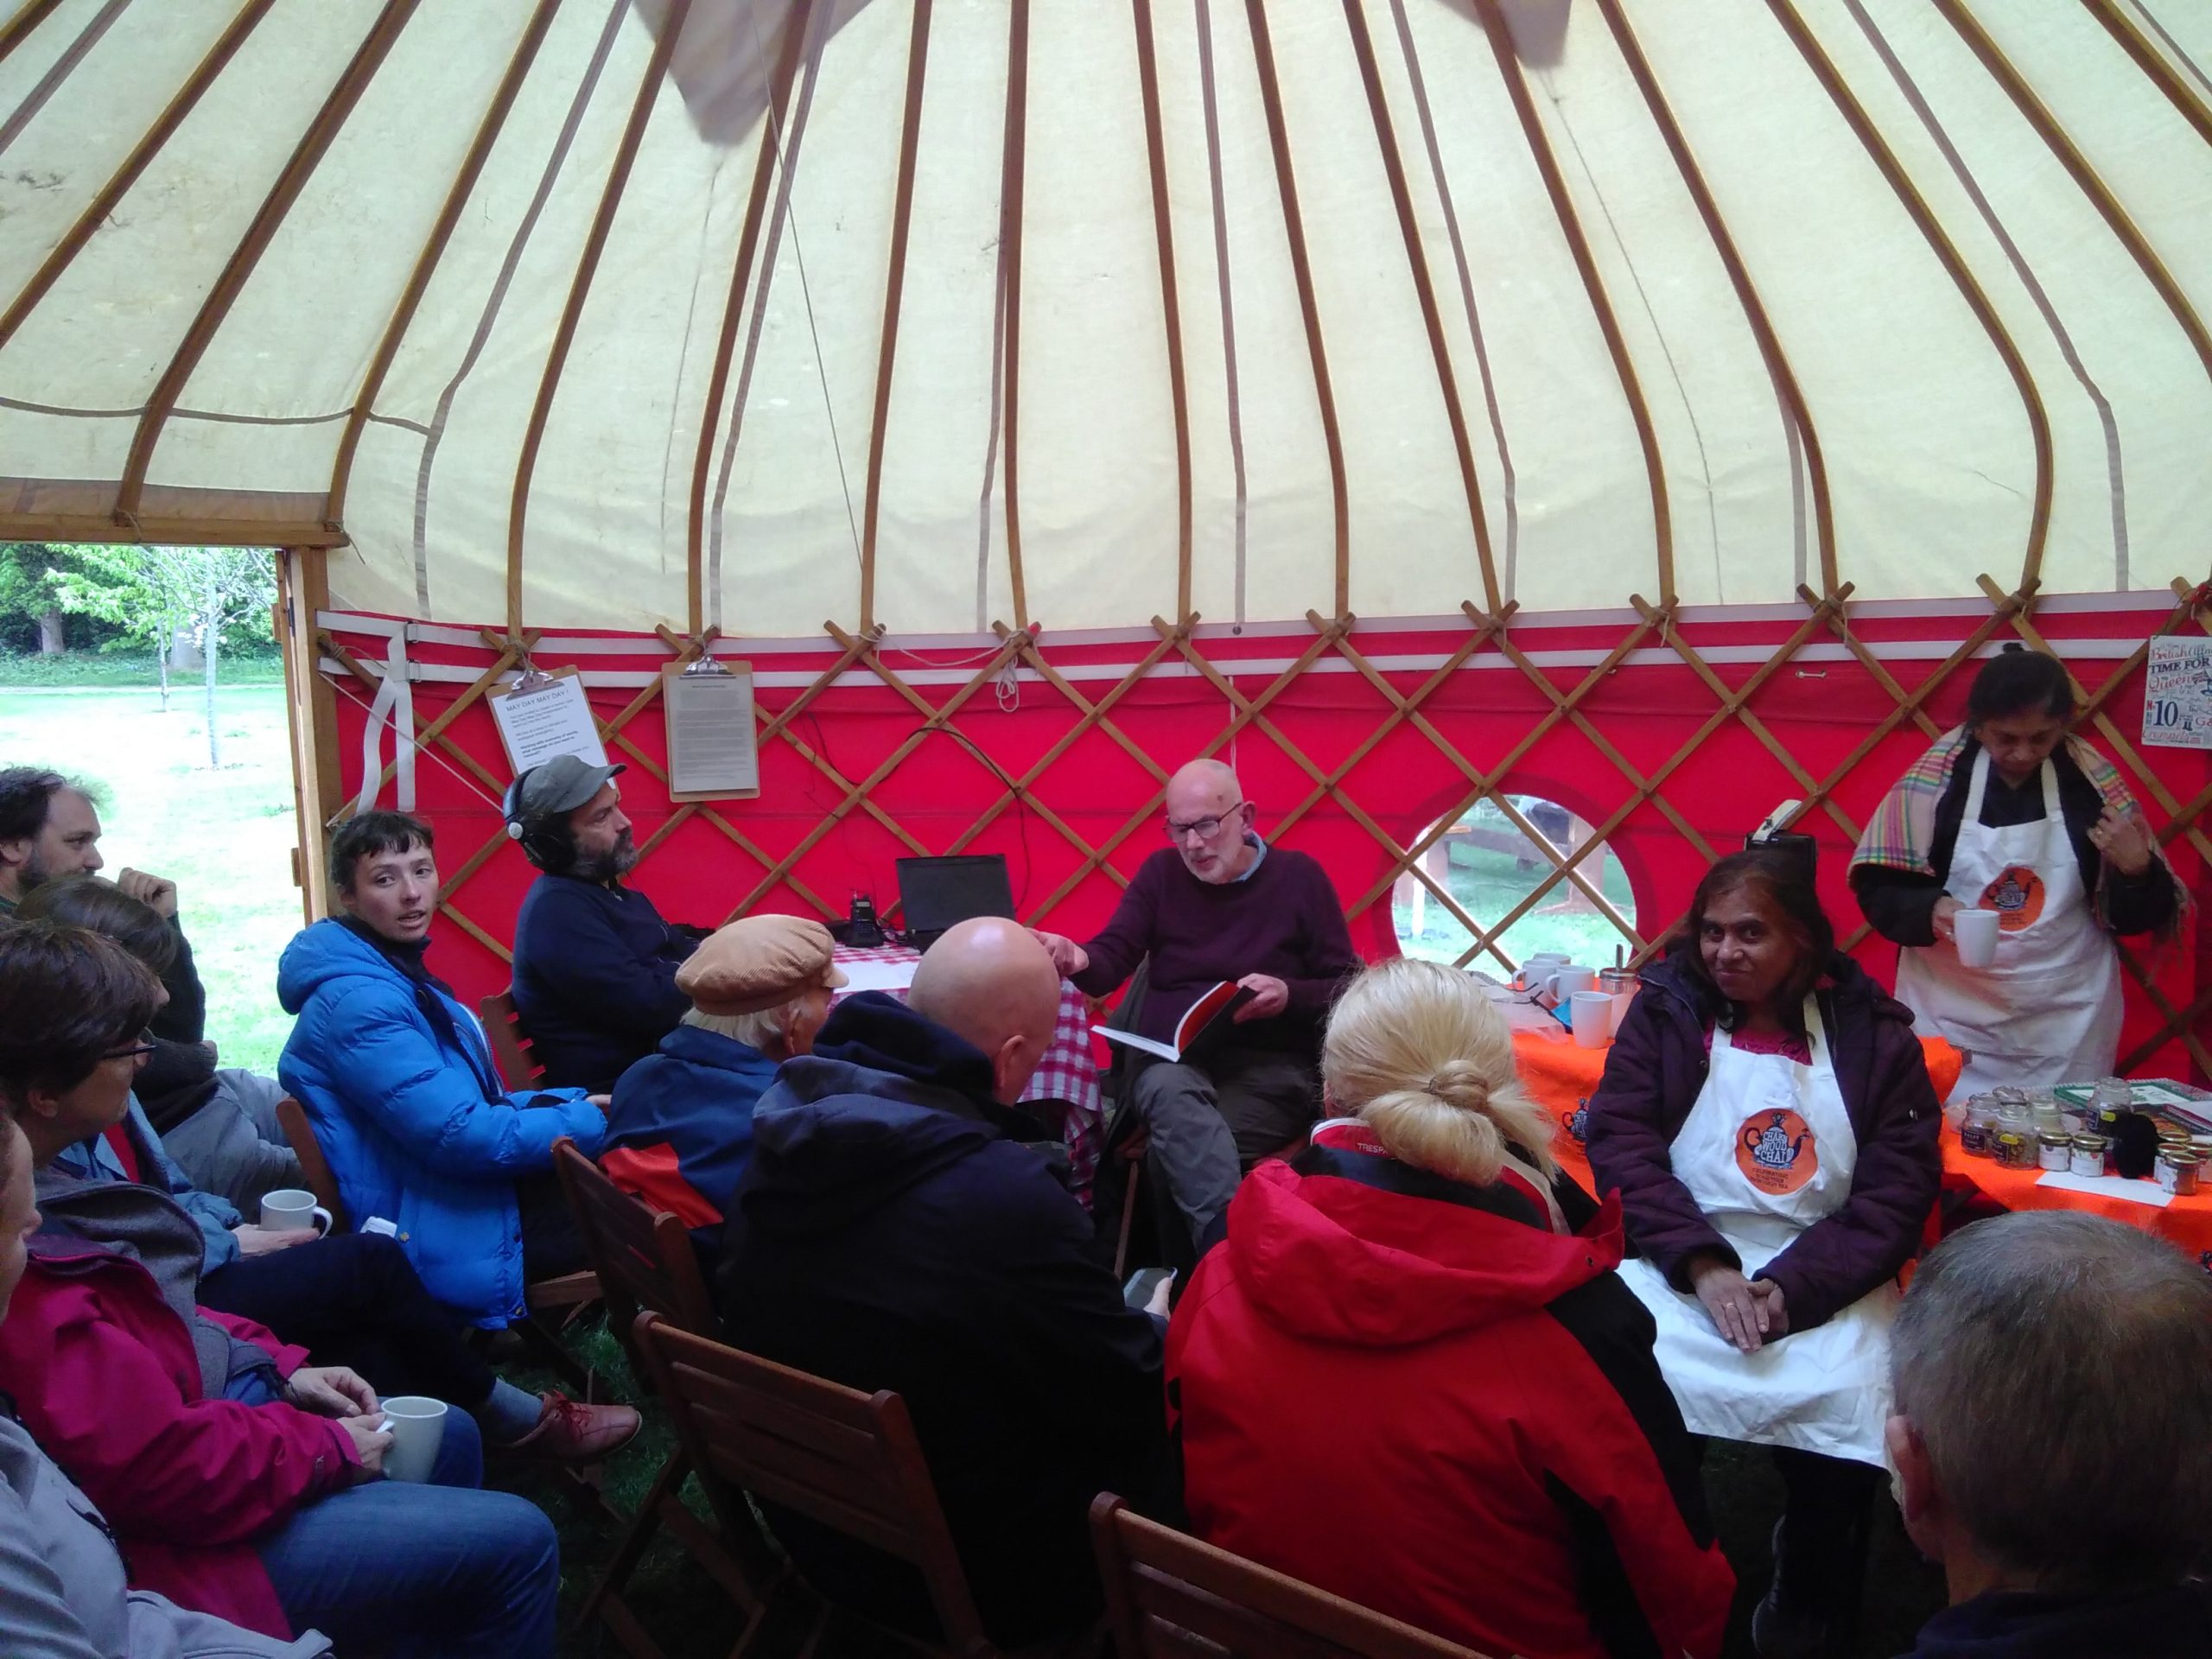 People sitting inside a yurt listening to another person talking